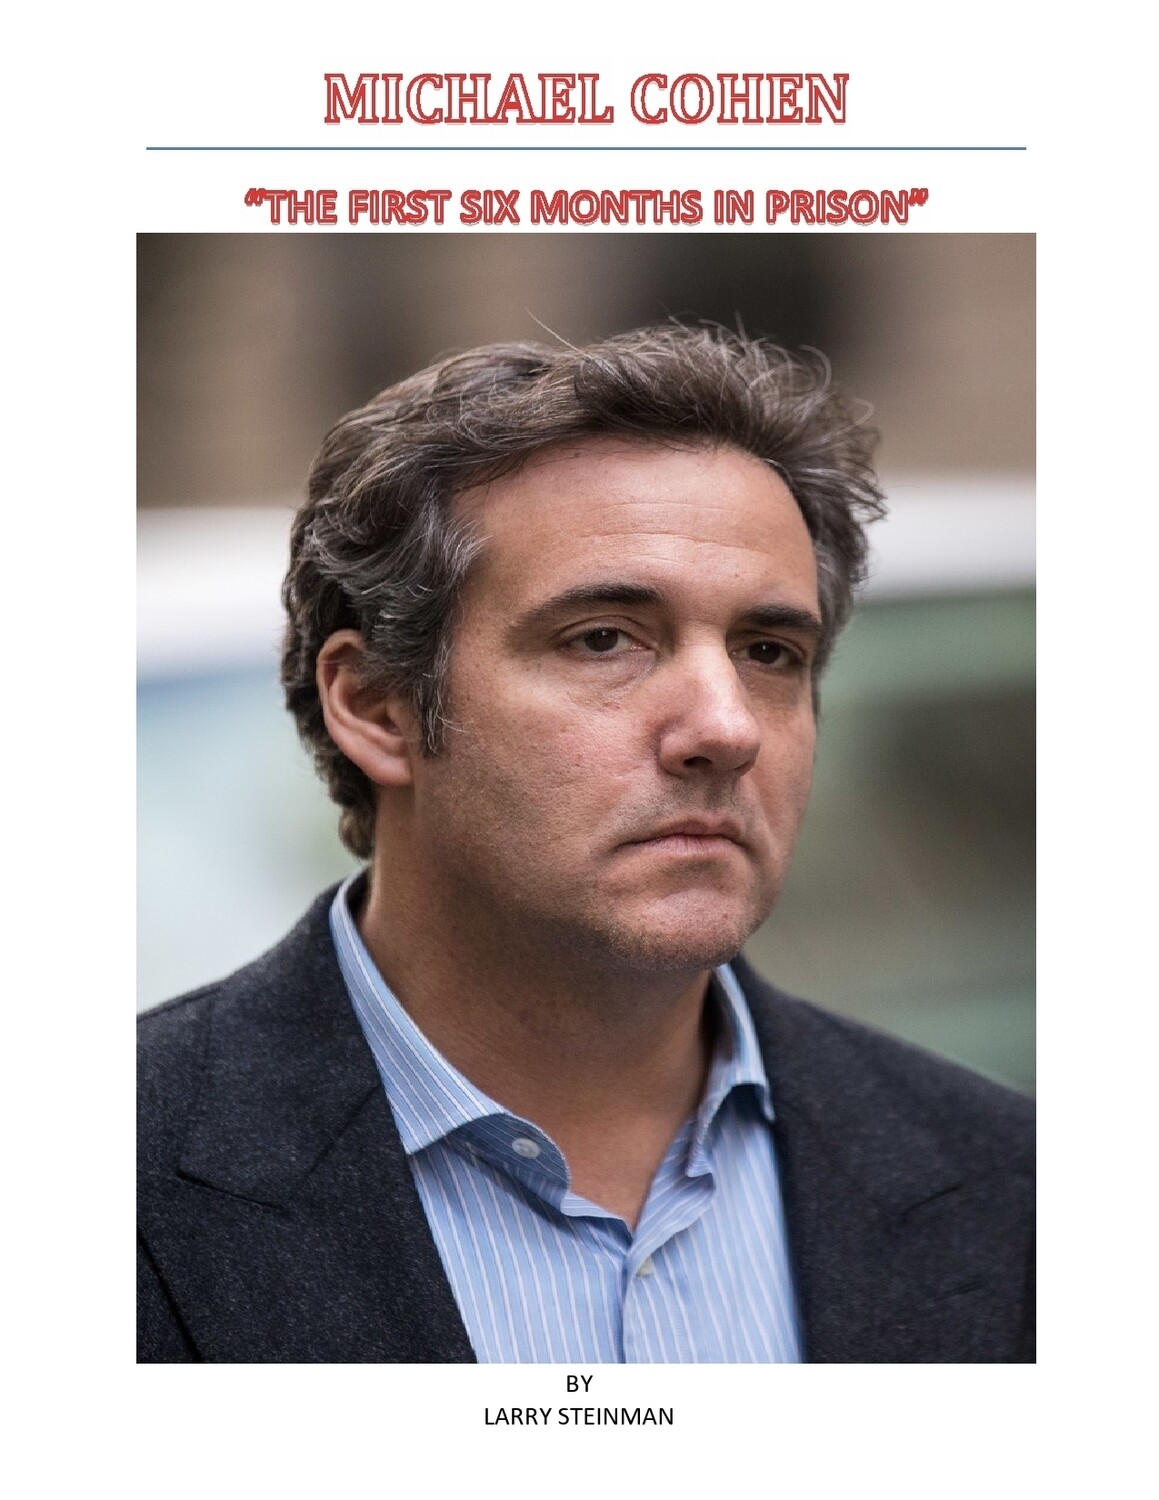 MICHAEL COHEN "THE FIRST SIX MONTHS IN PRISON "    "TAP COVER FOR DESCRIPTION AND SCROLL DOWN "